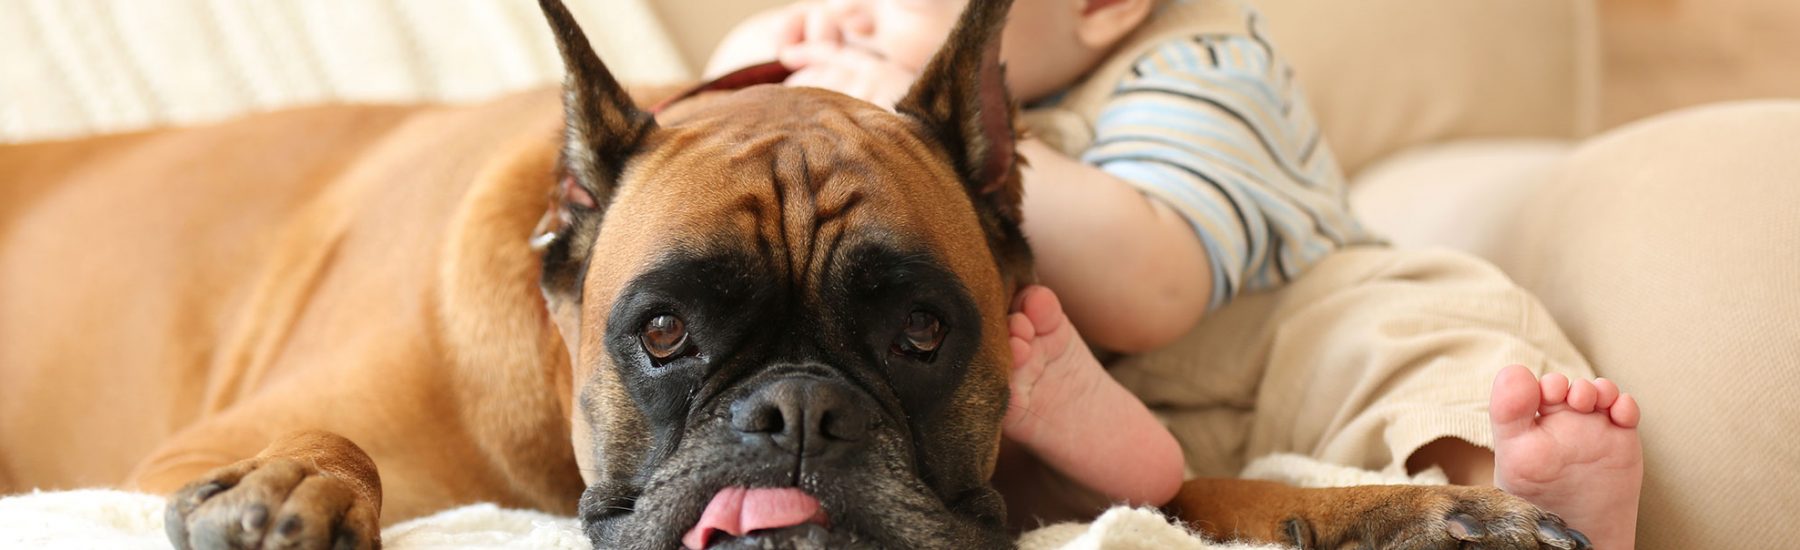 Dog lying down next to a baby